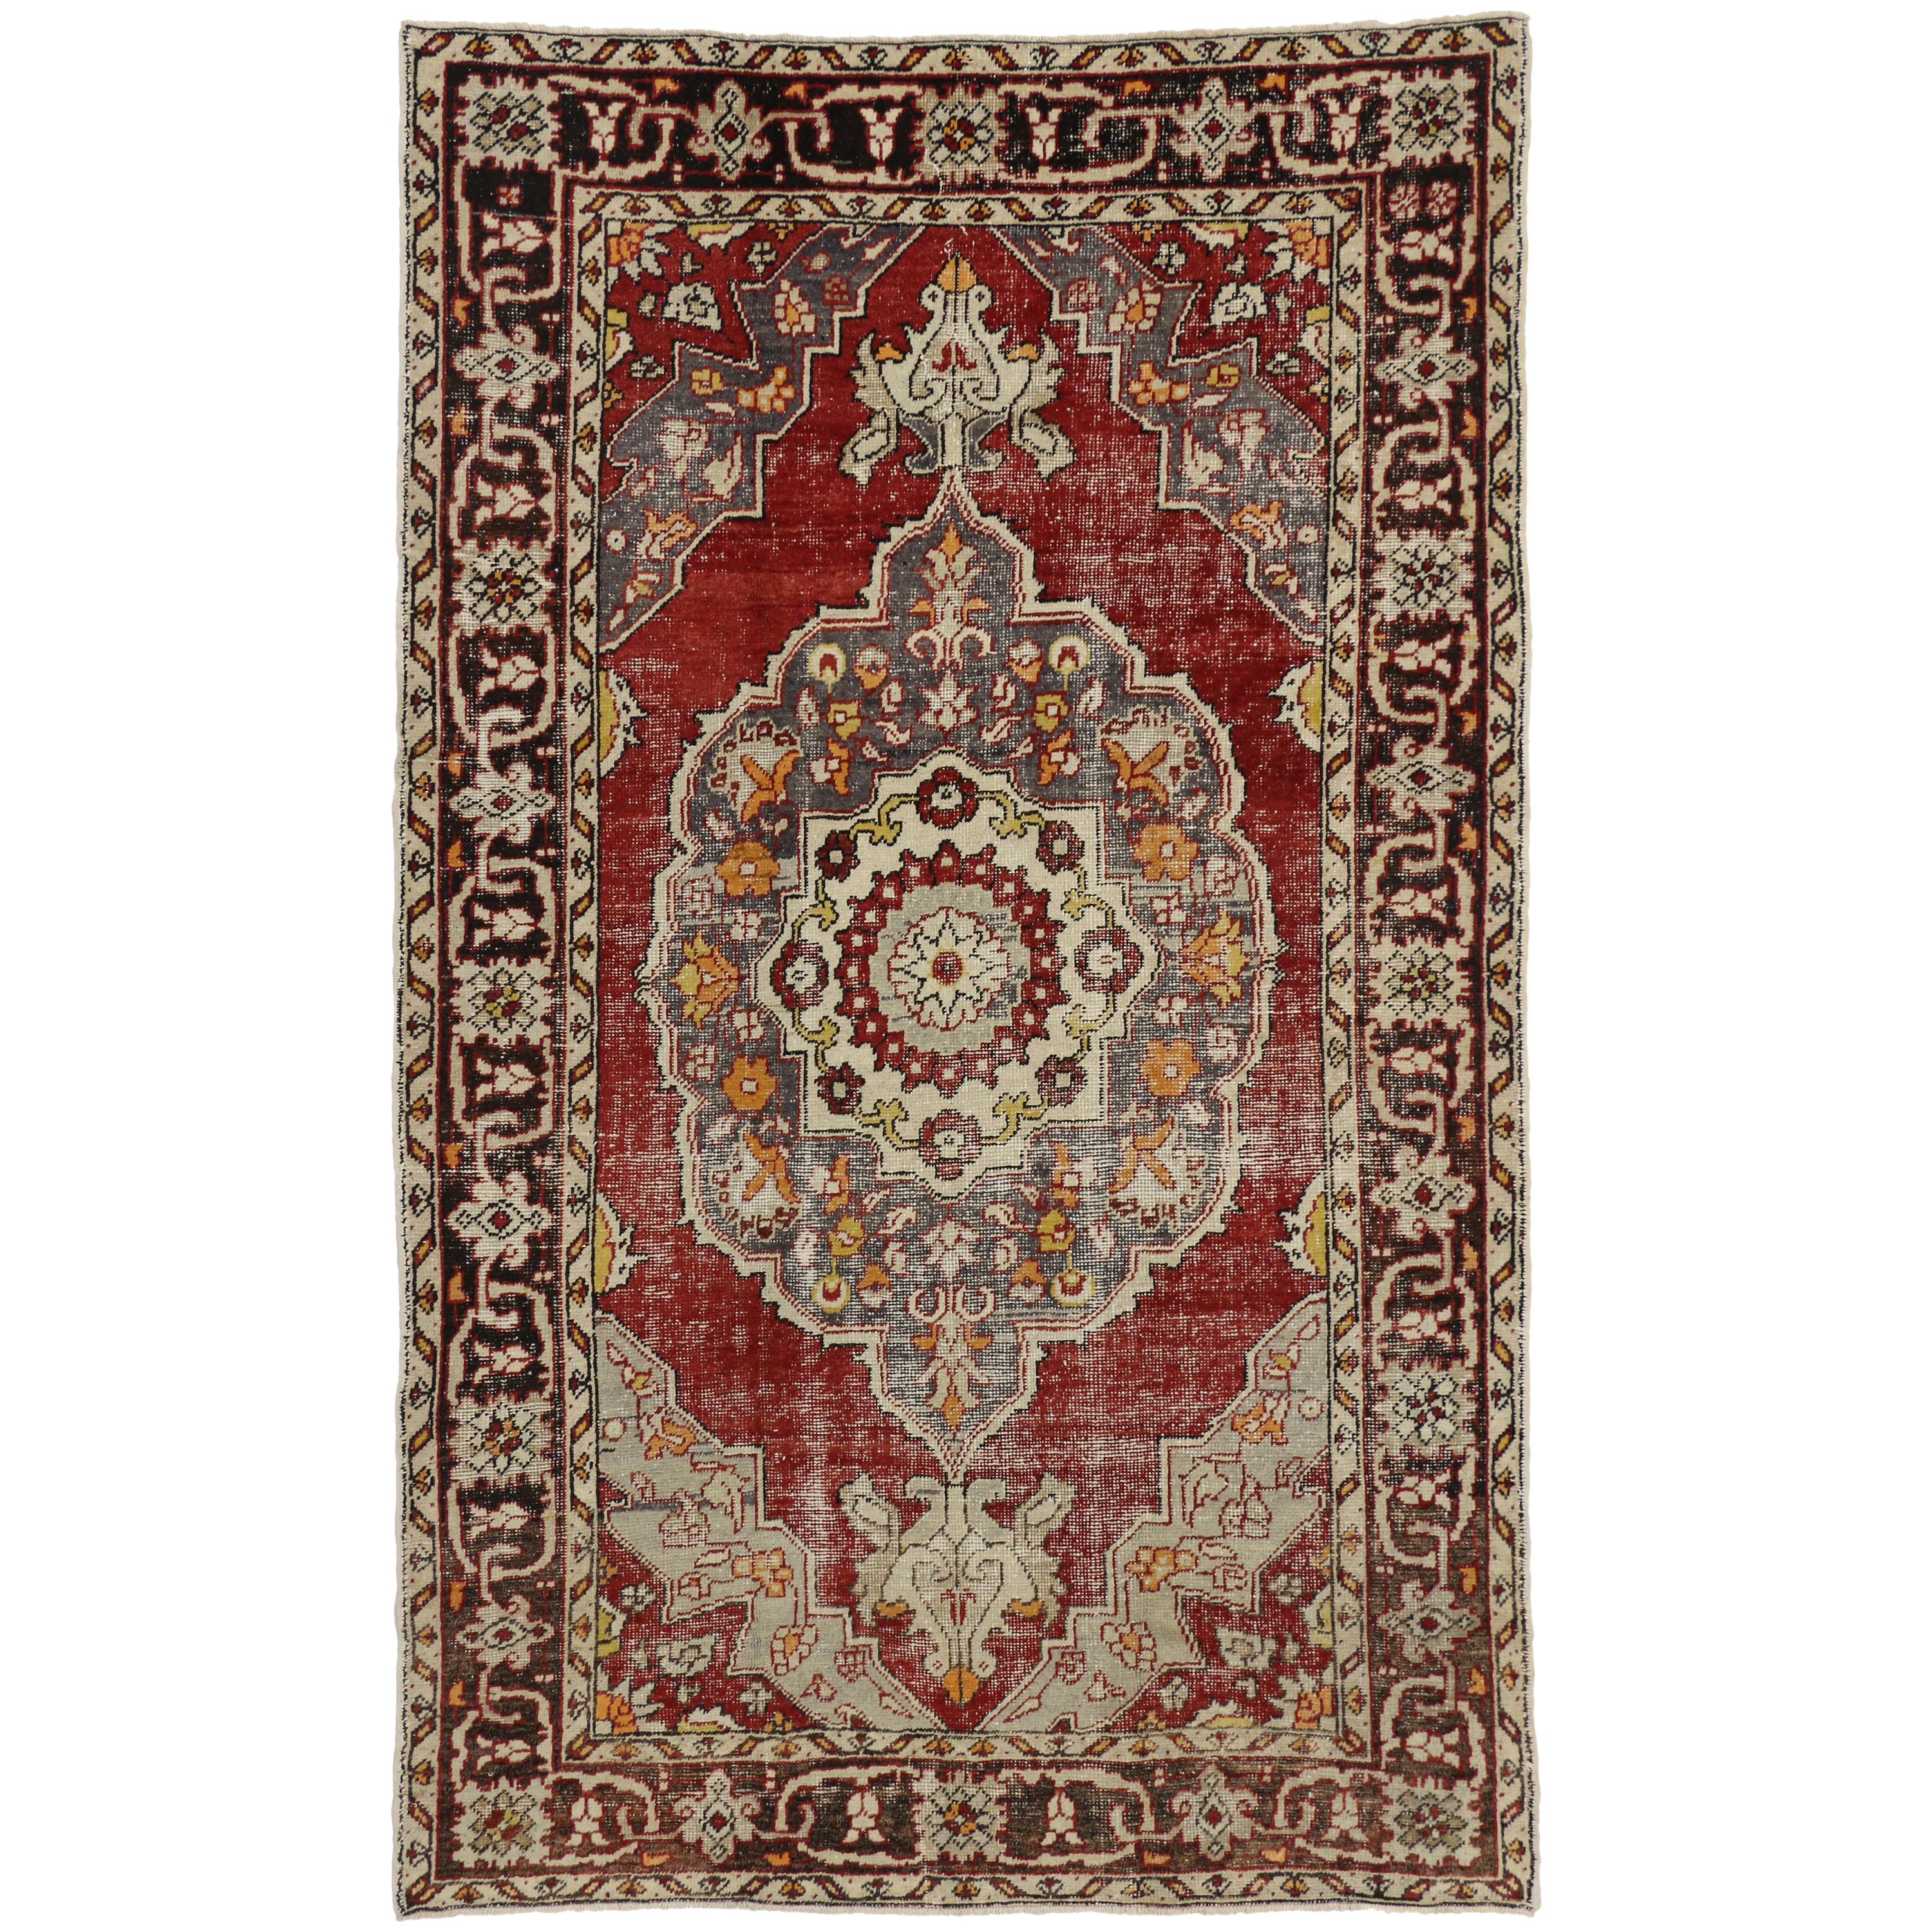 Distressed Vintage Turkish Oushak Rug with Rustic Arts & Crafts Style